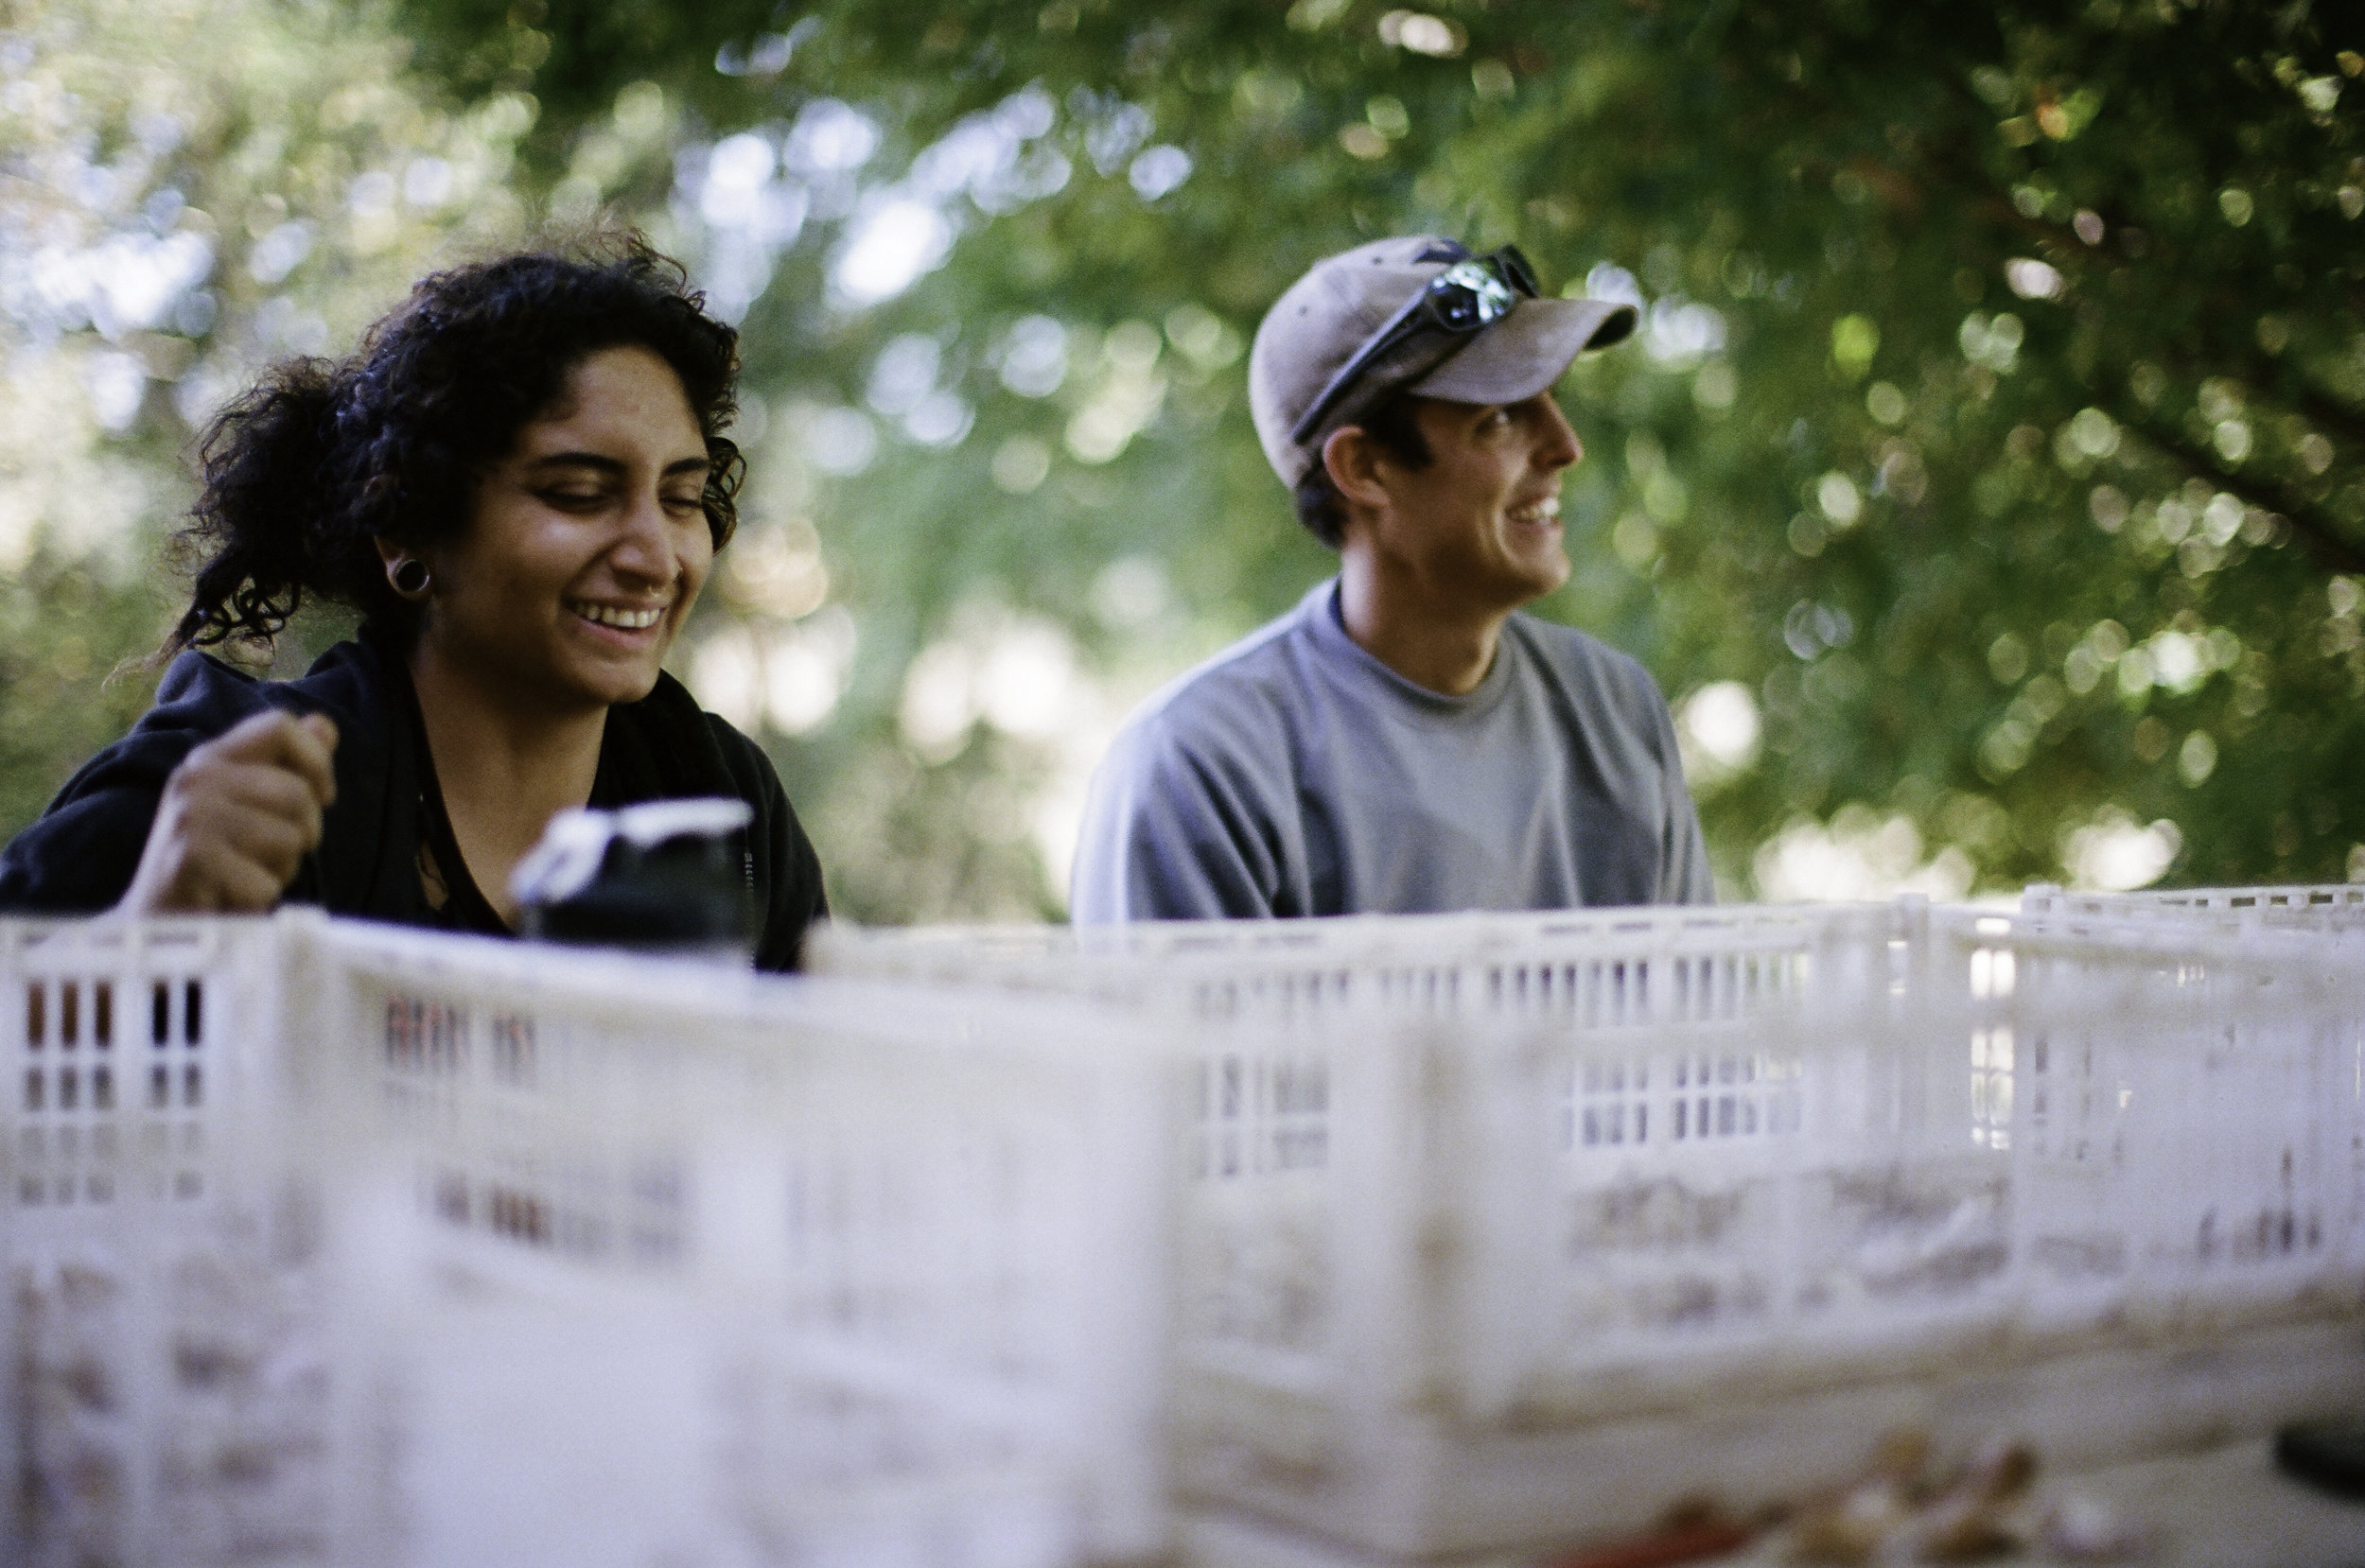  Zahra  Hooshyar  and  Gerardo Patron-Cano are pursuing careers in agriculture.&nbsp; They broke open roughly 2500 cloves and competed to see who could find the biggest one. 